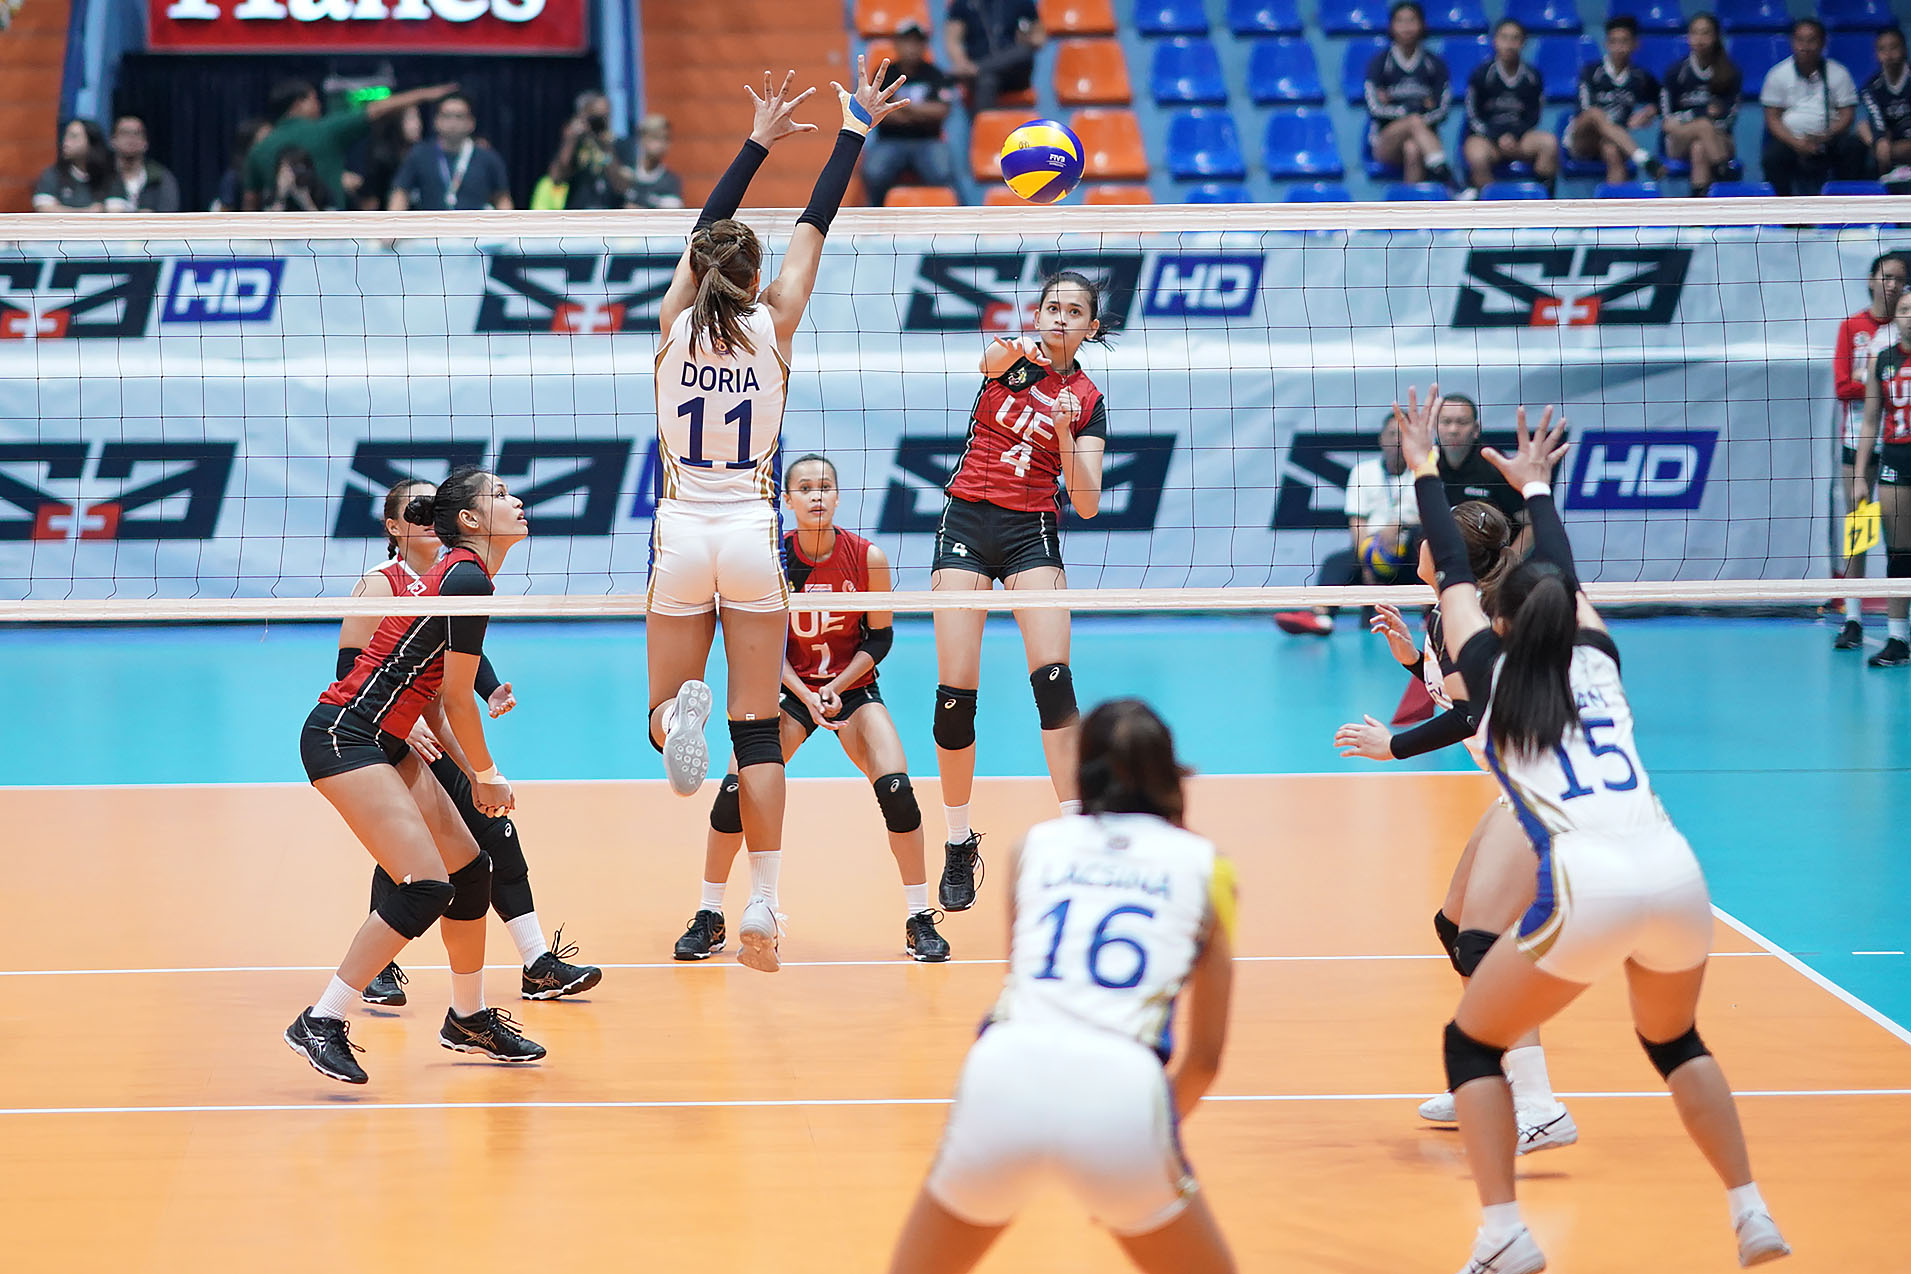 BREAKTHROUGH. The NU Lady Bulldogs bounce back from an opening-day loss. Photo by Josh Albelda/Rappler 